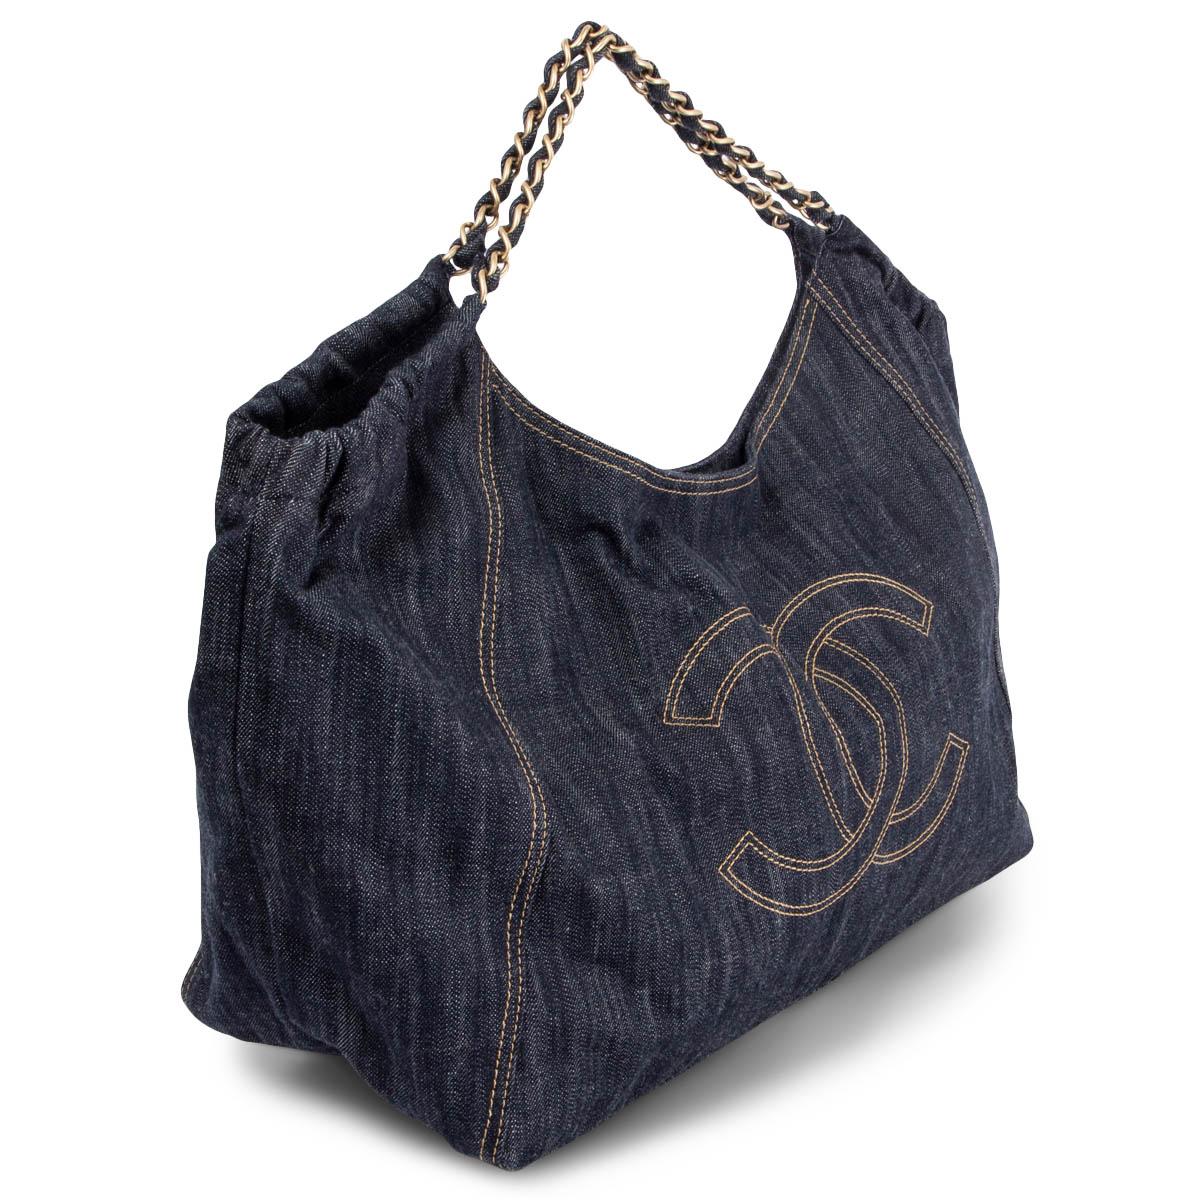 100% authentic Chanel Coco Cabas hobo shoulder bag in blue denim canvas and brushed gold-tone hardware with beige stitching details. Opens with a magnetic button on top and is lined in nude logo nylon with one big zipper pocket against the back and